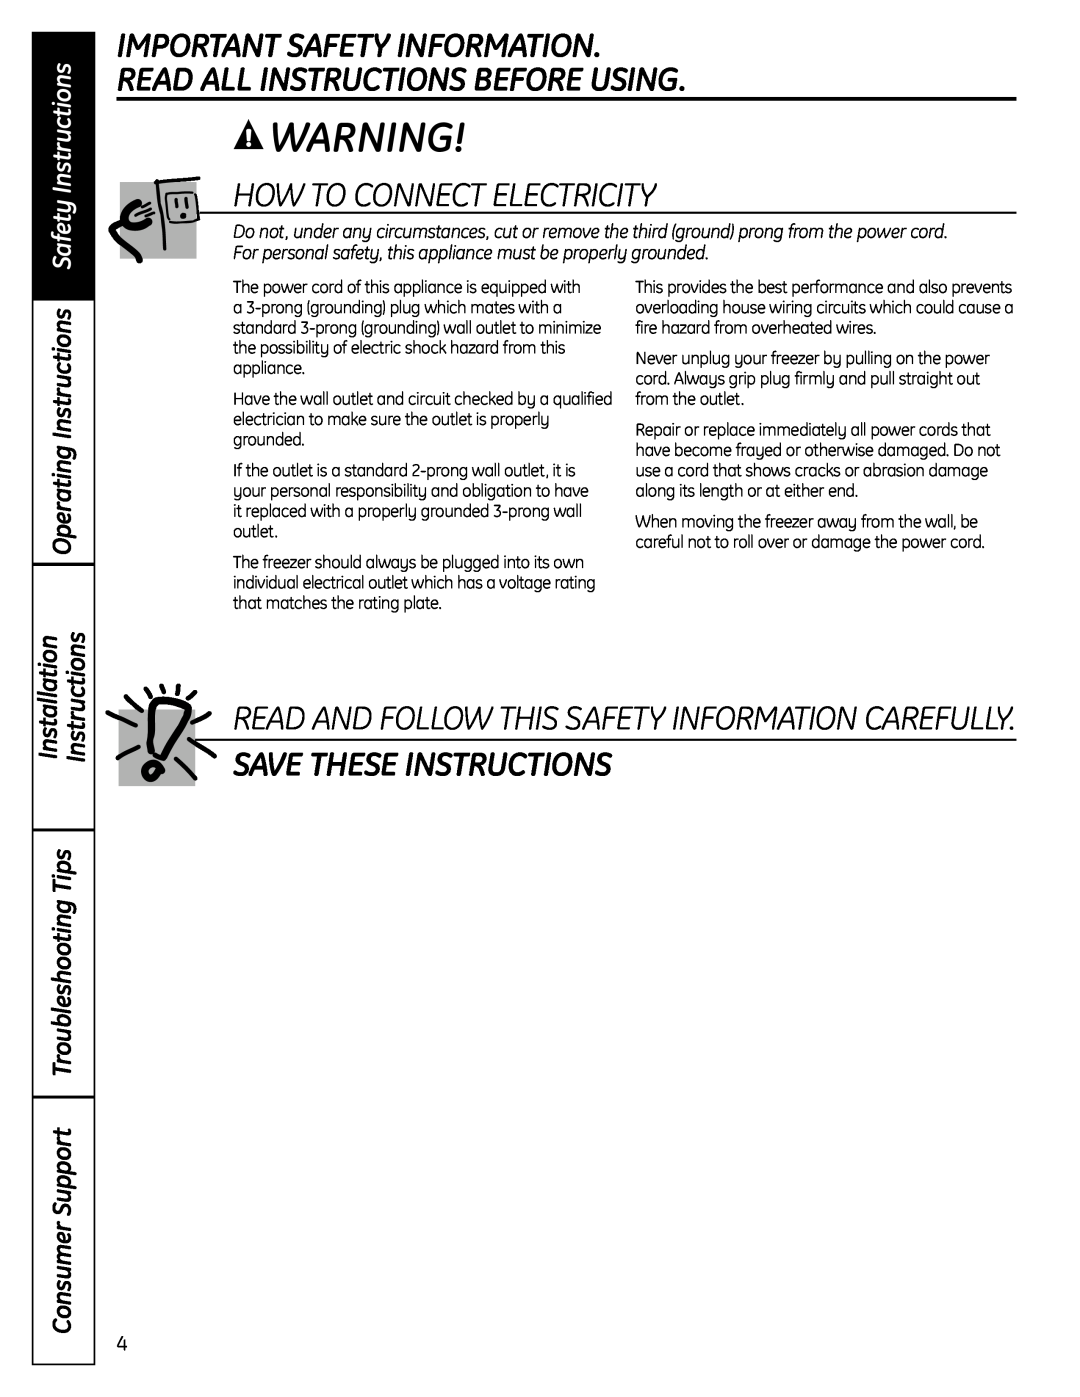 GE FUM13 How To Connect Electricity, Save These Instructions, Read And Follow This Safety Information Carefully 